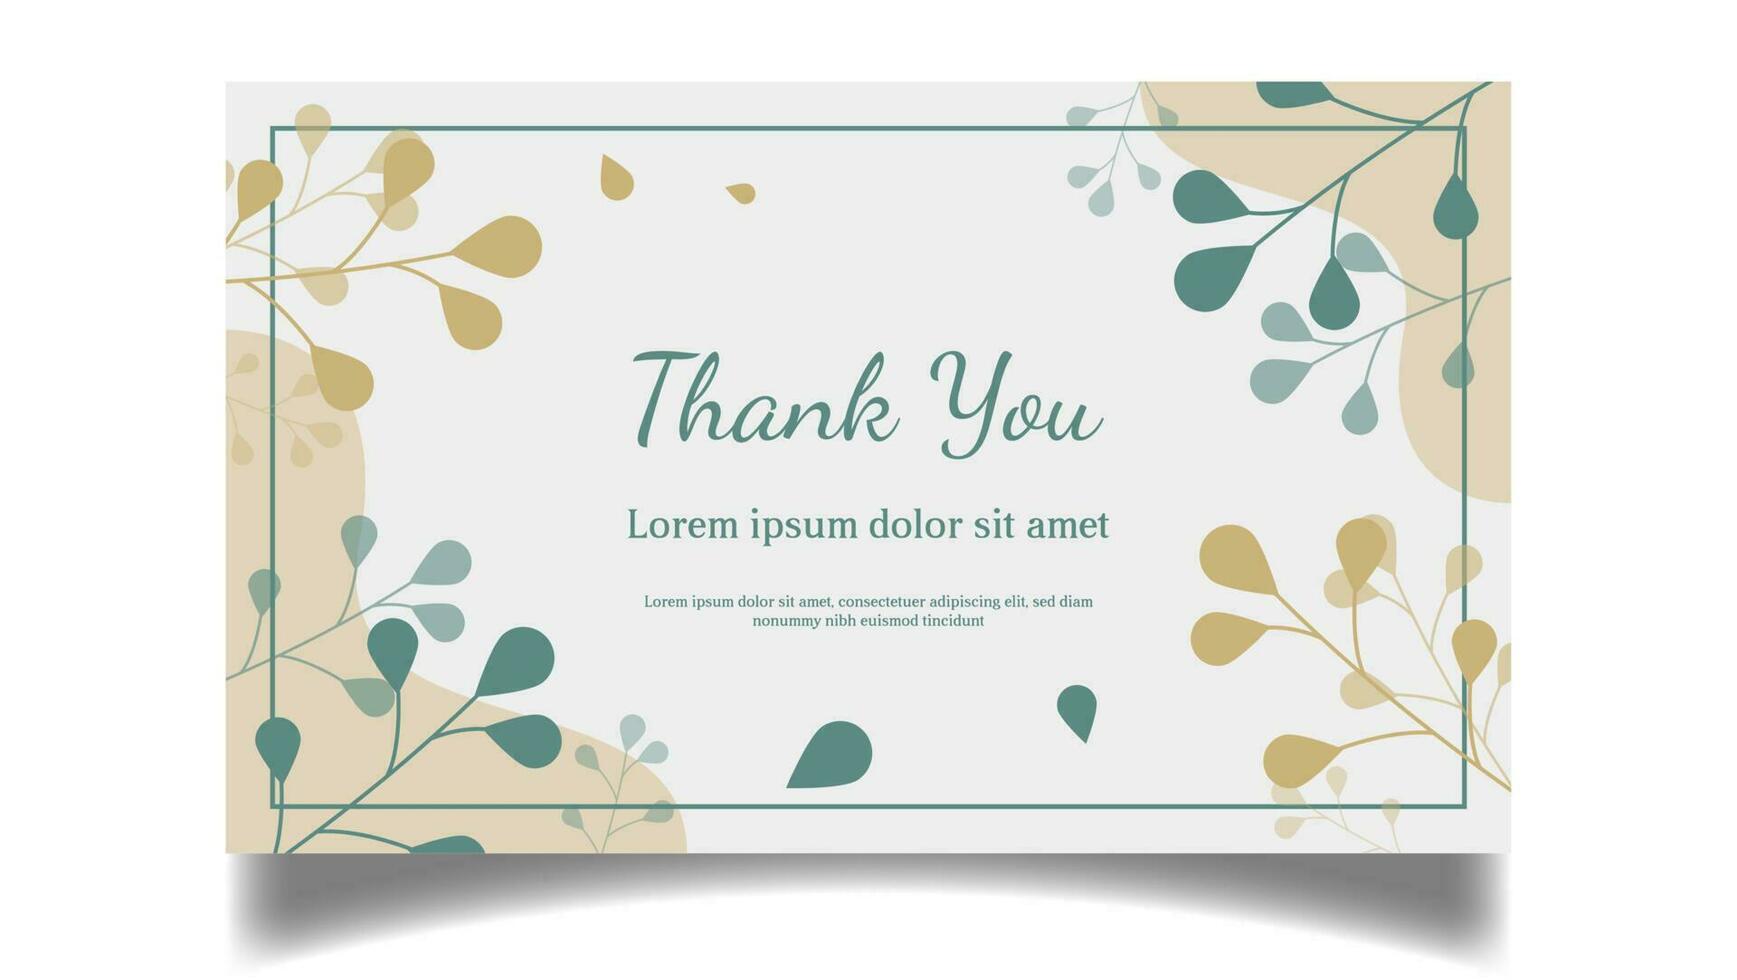 thank you card design design vector with leaves and flowers in pastel color